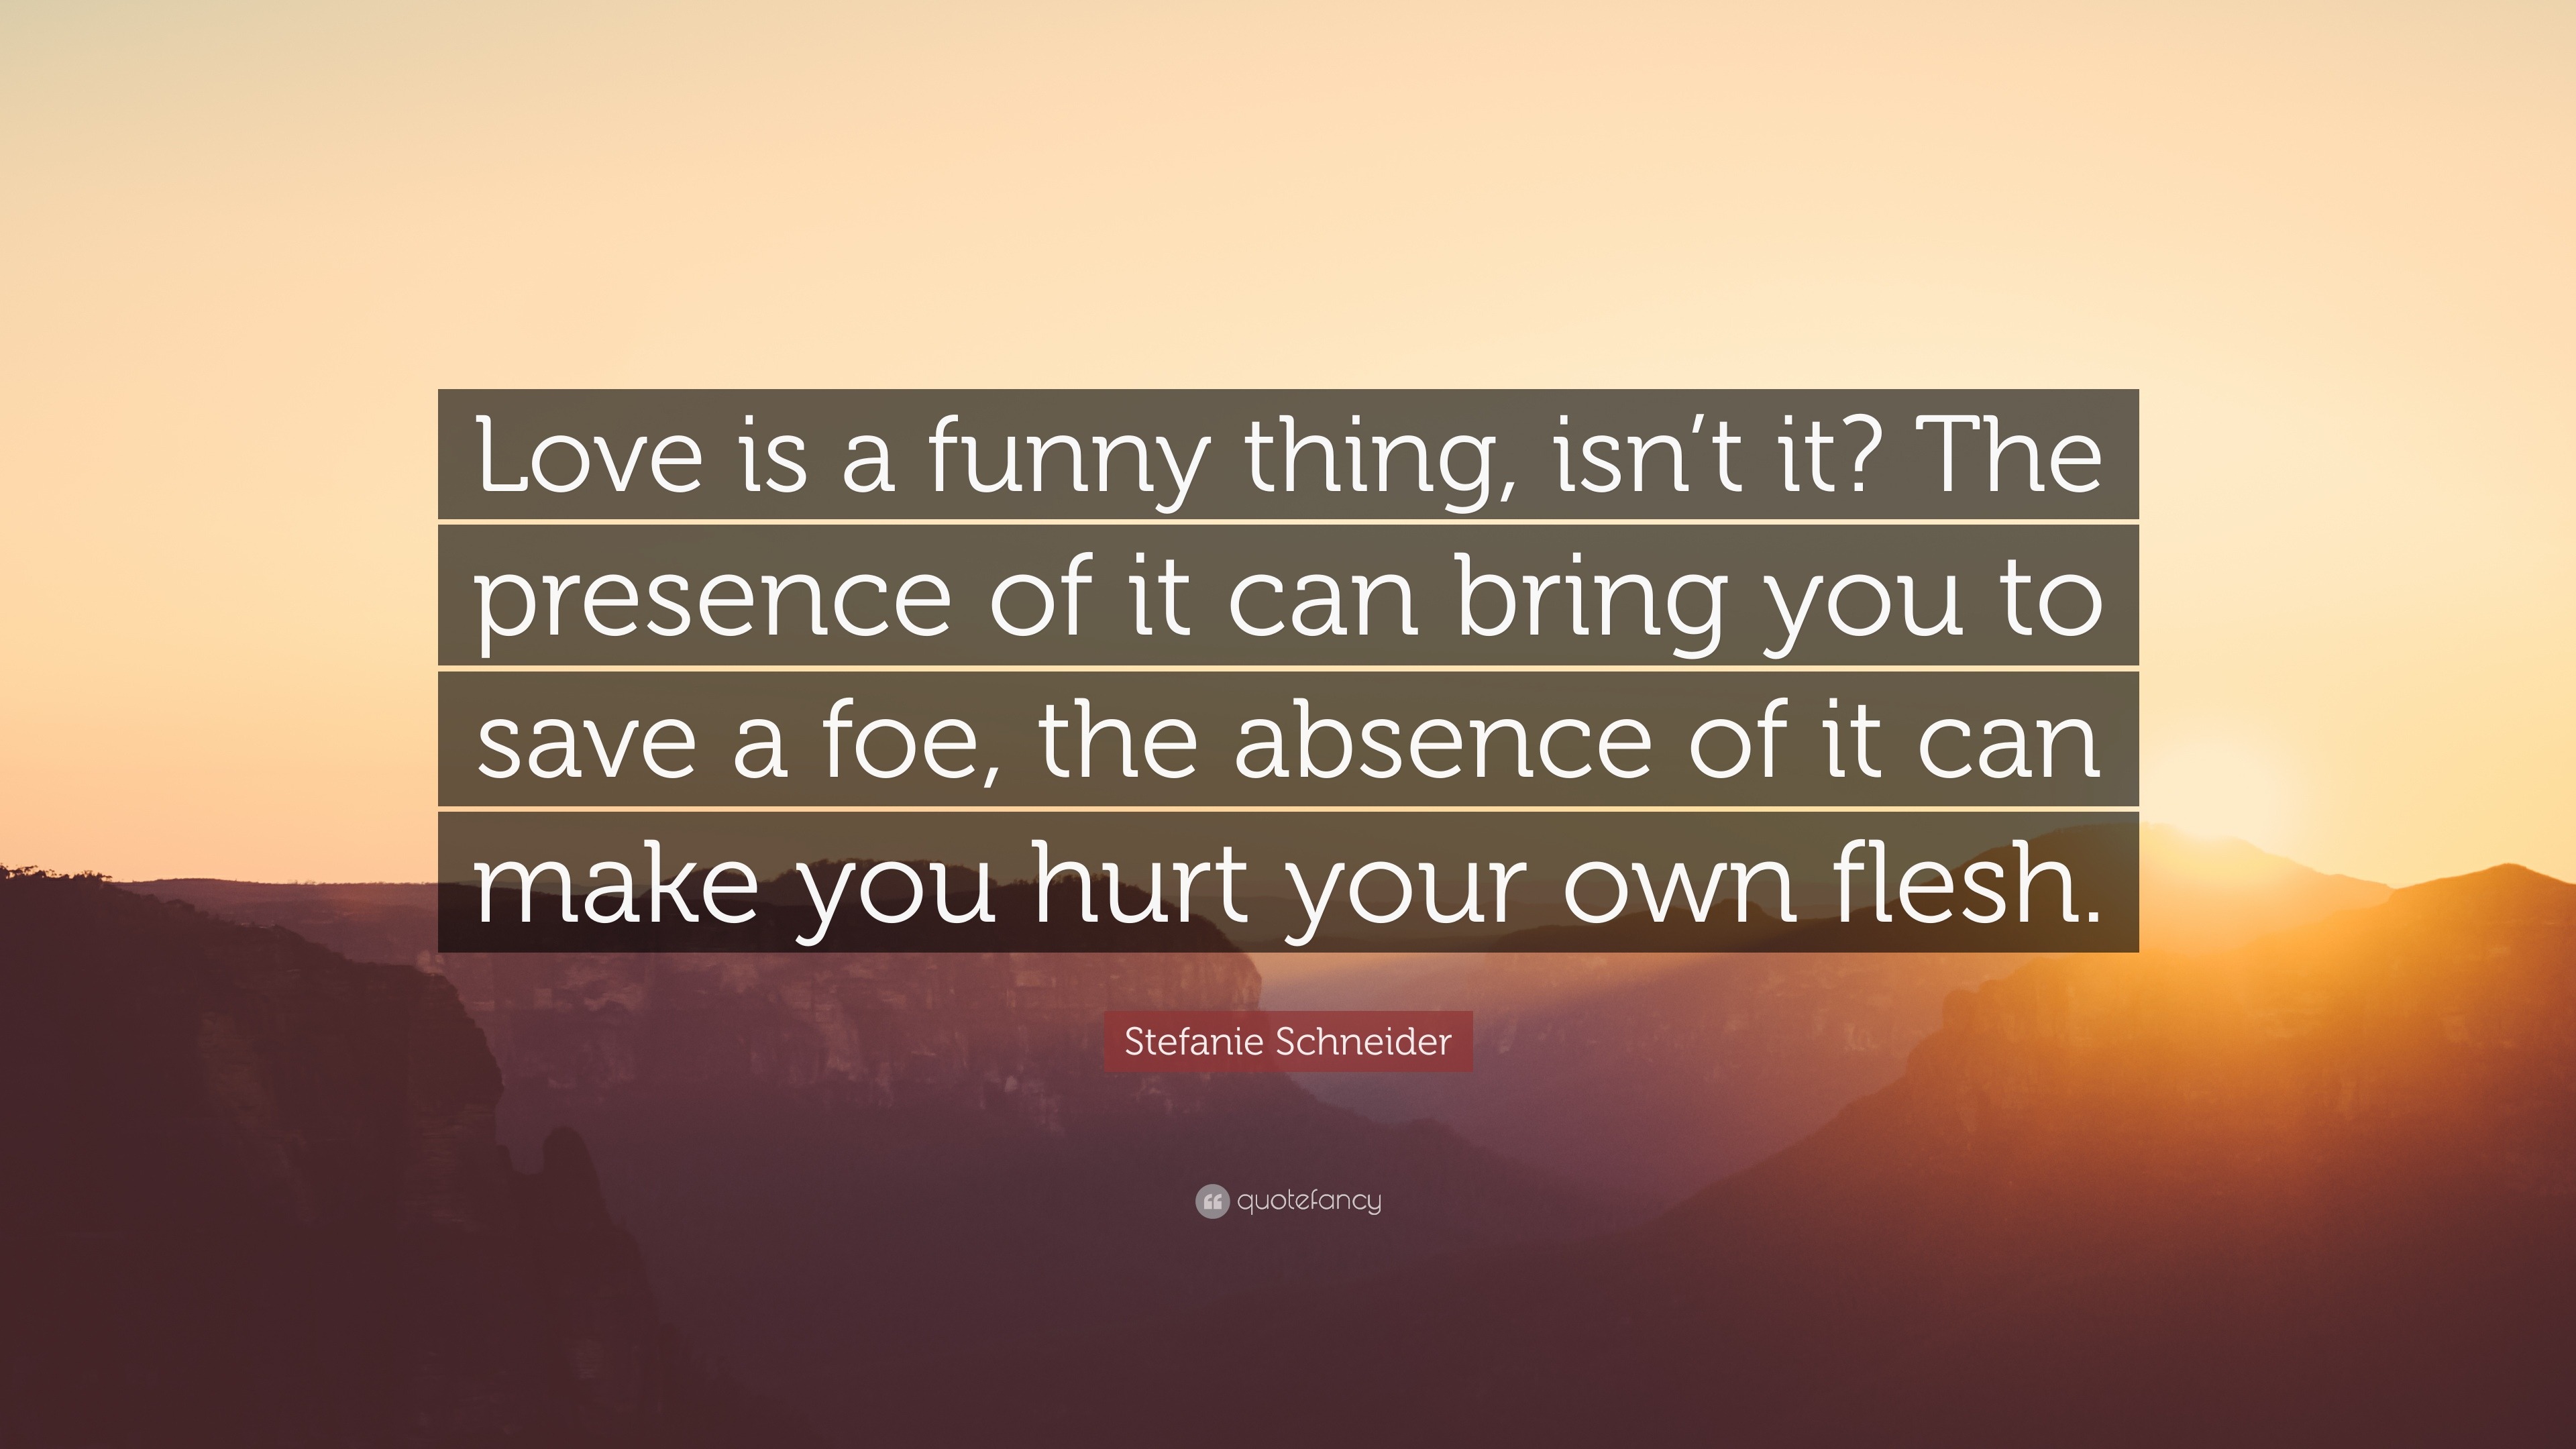 Stefanie Schneider Quote: “Love is a funny thing, isn't it? The presence of  it can bring you to save a foe, the absence of it can make you hurt you...”